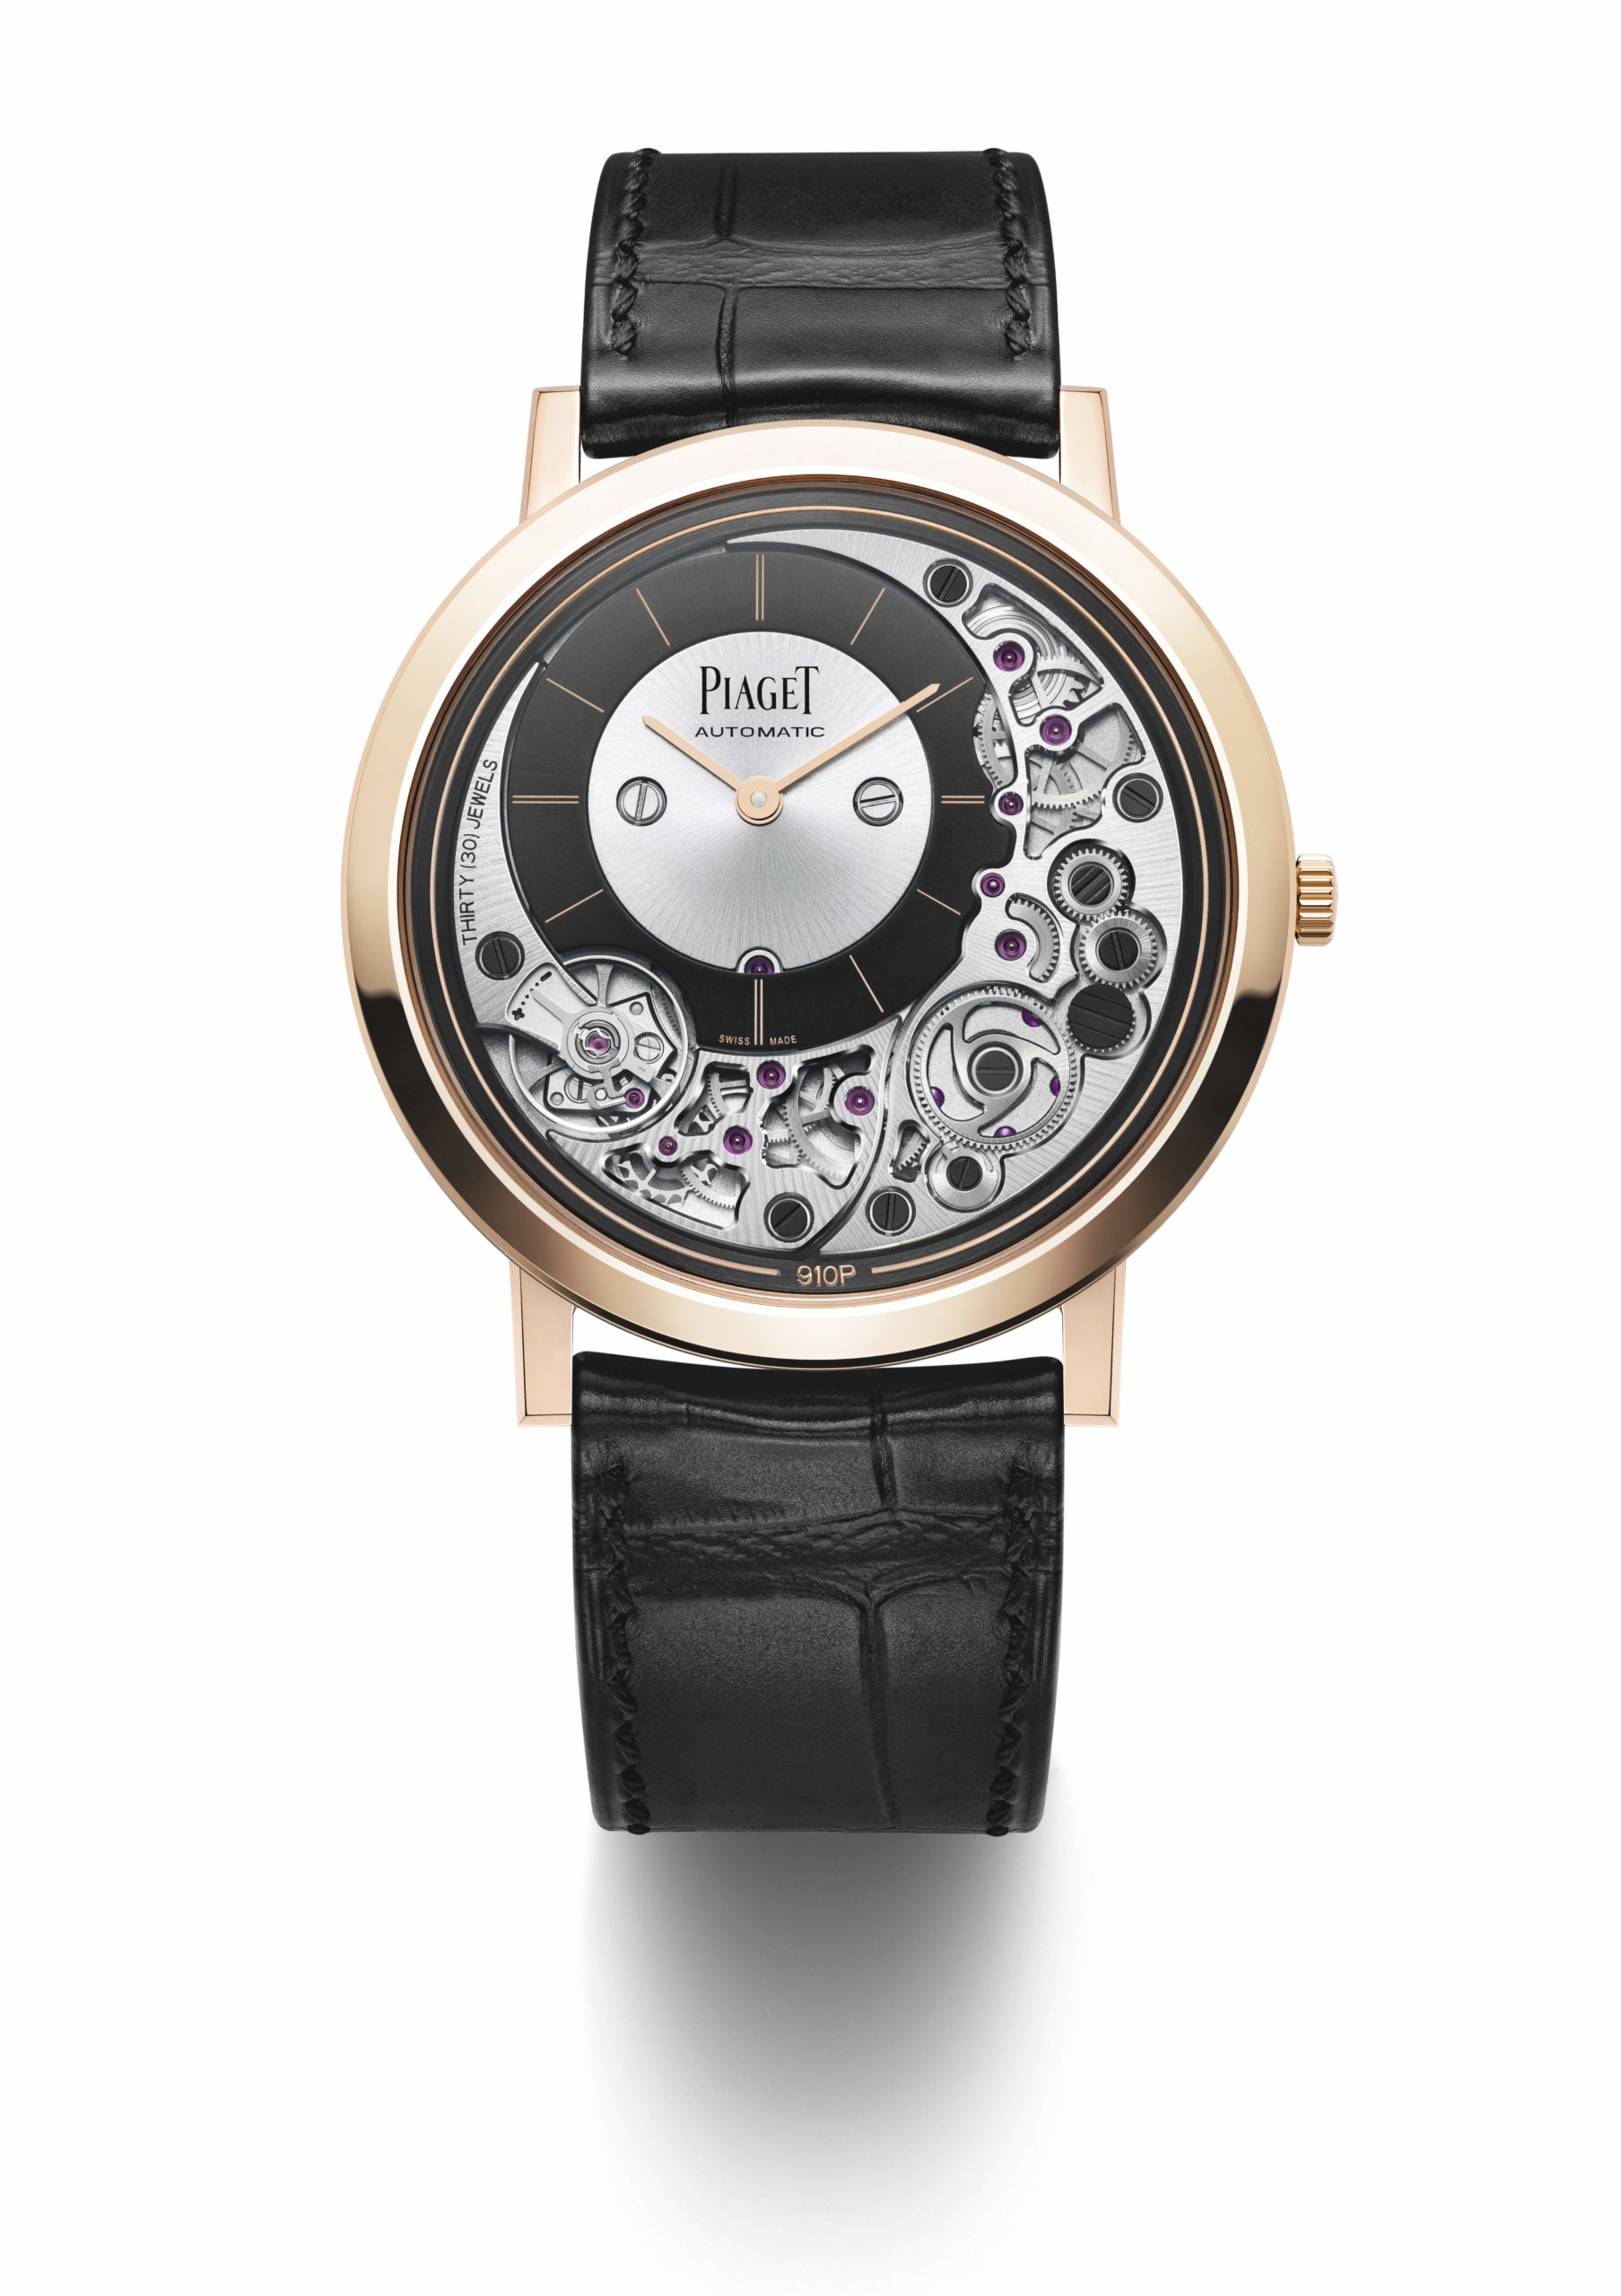 PIAGET ALTIPLANO ULTIMATE AUTOMATIC 910P